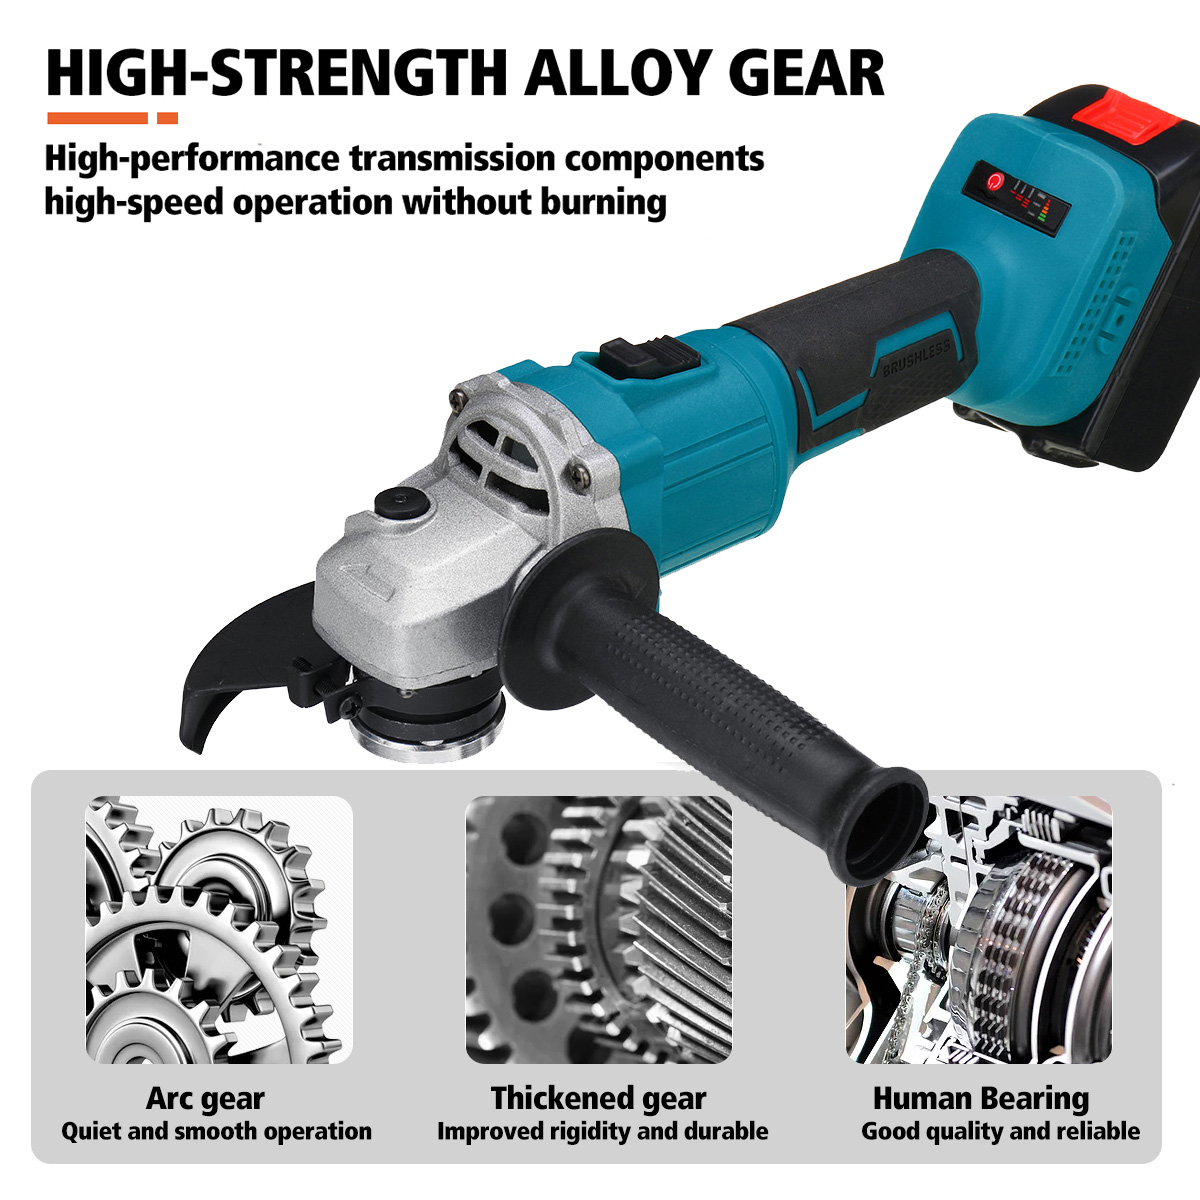 125mm-Brushless-Cordless-Angle-Grinder-3-Gears-Polishing-Grinding-Cutting-Tool-With-Battery-Also-For-1858837-4